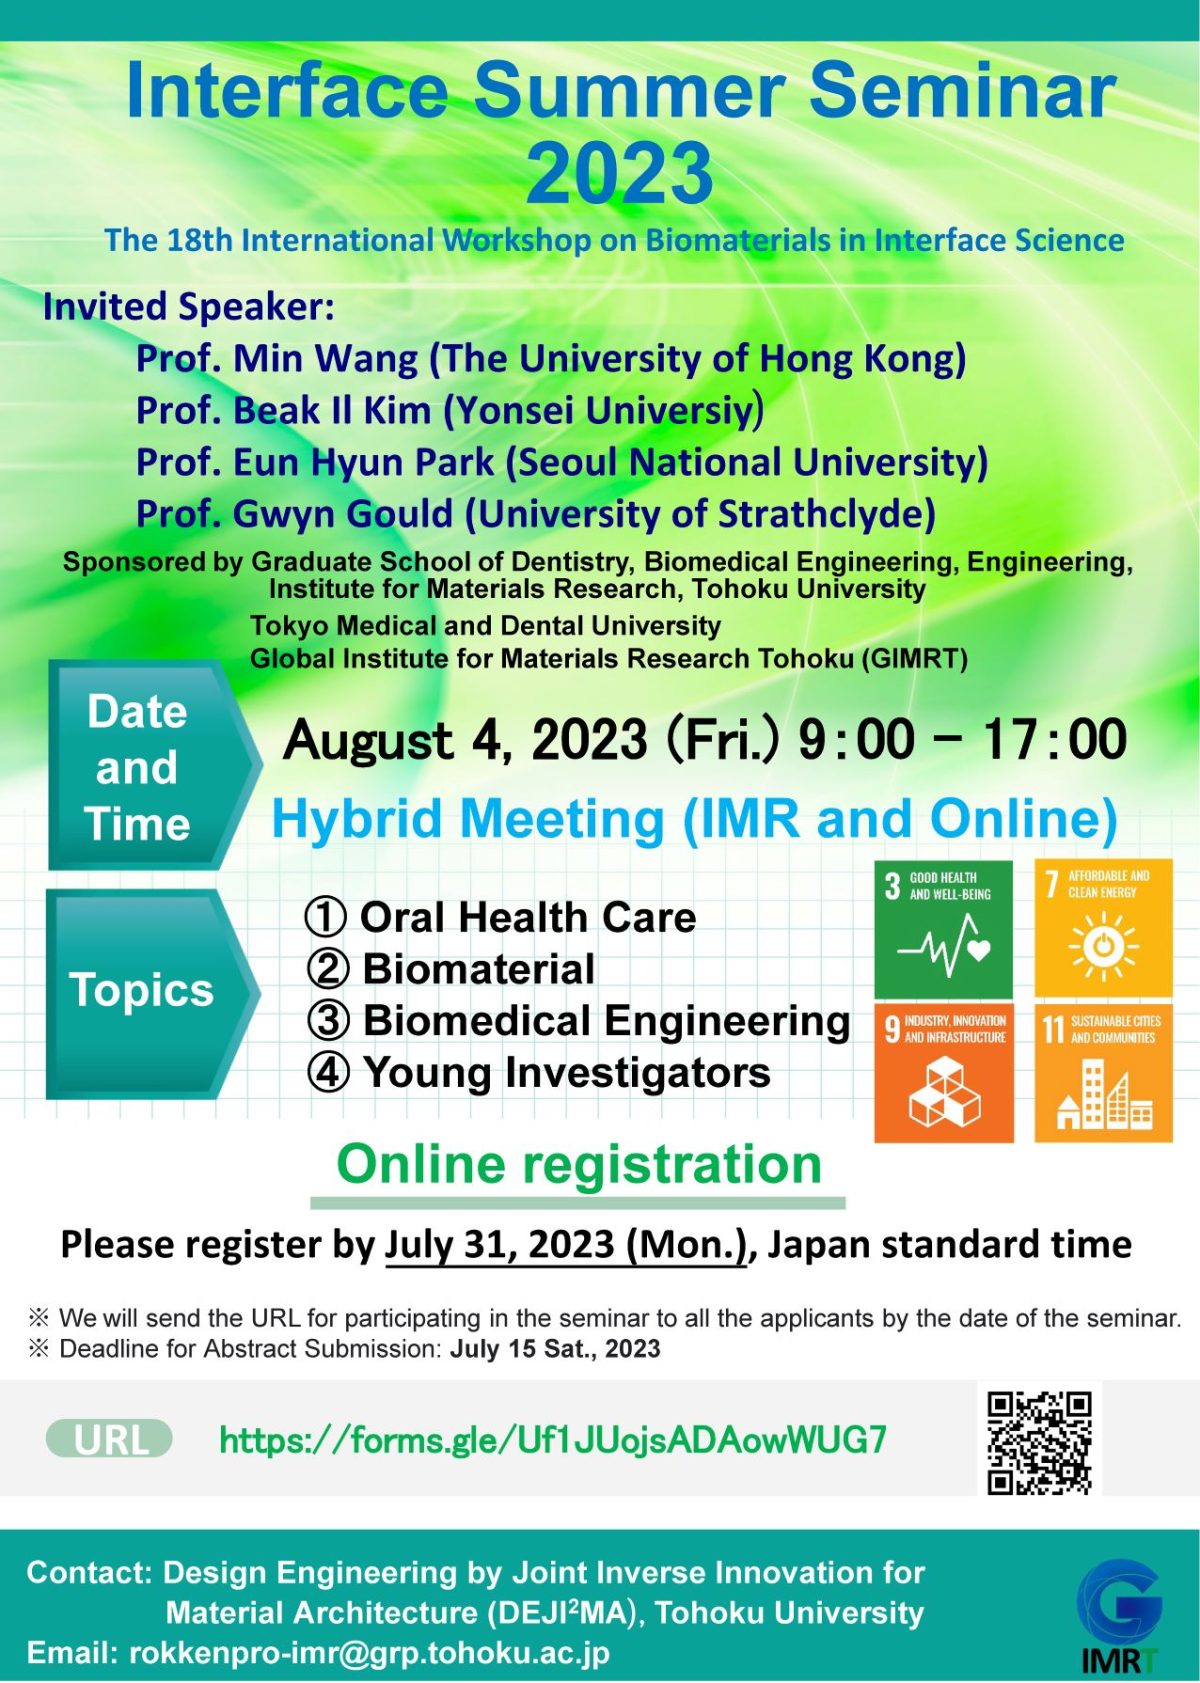 “Interface Summer Seminar 2023”(The 18th International Workshop on Biomaterials in Interface Science)（8月4日開催）